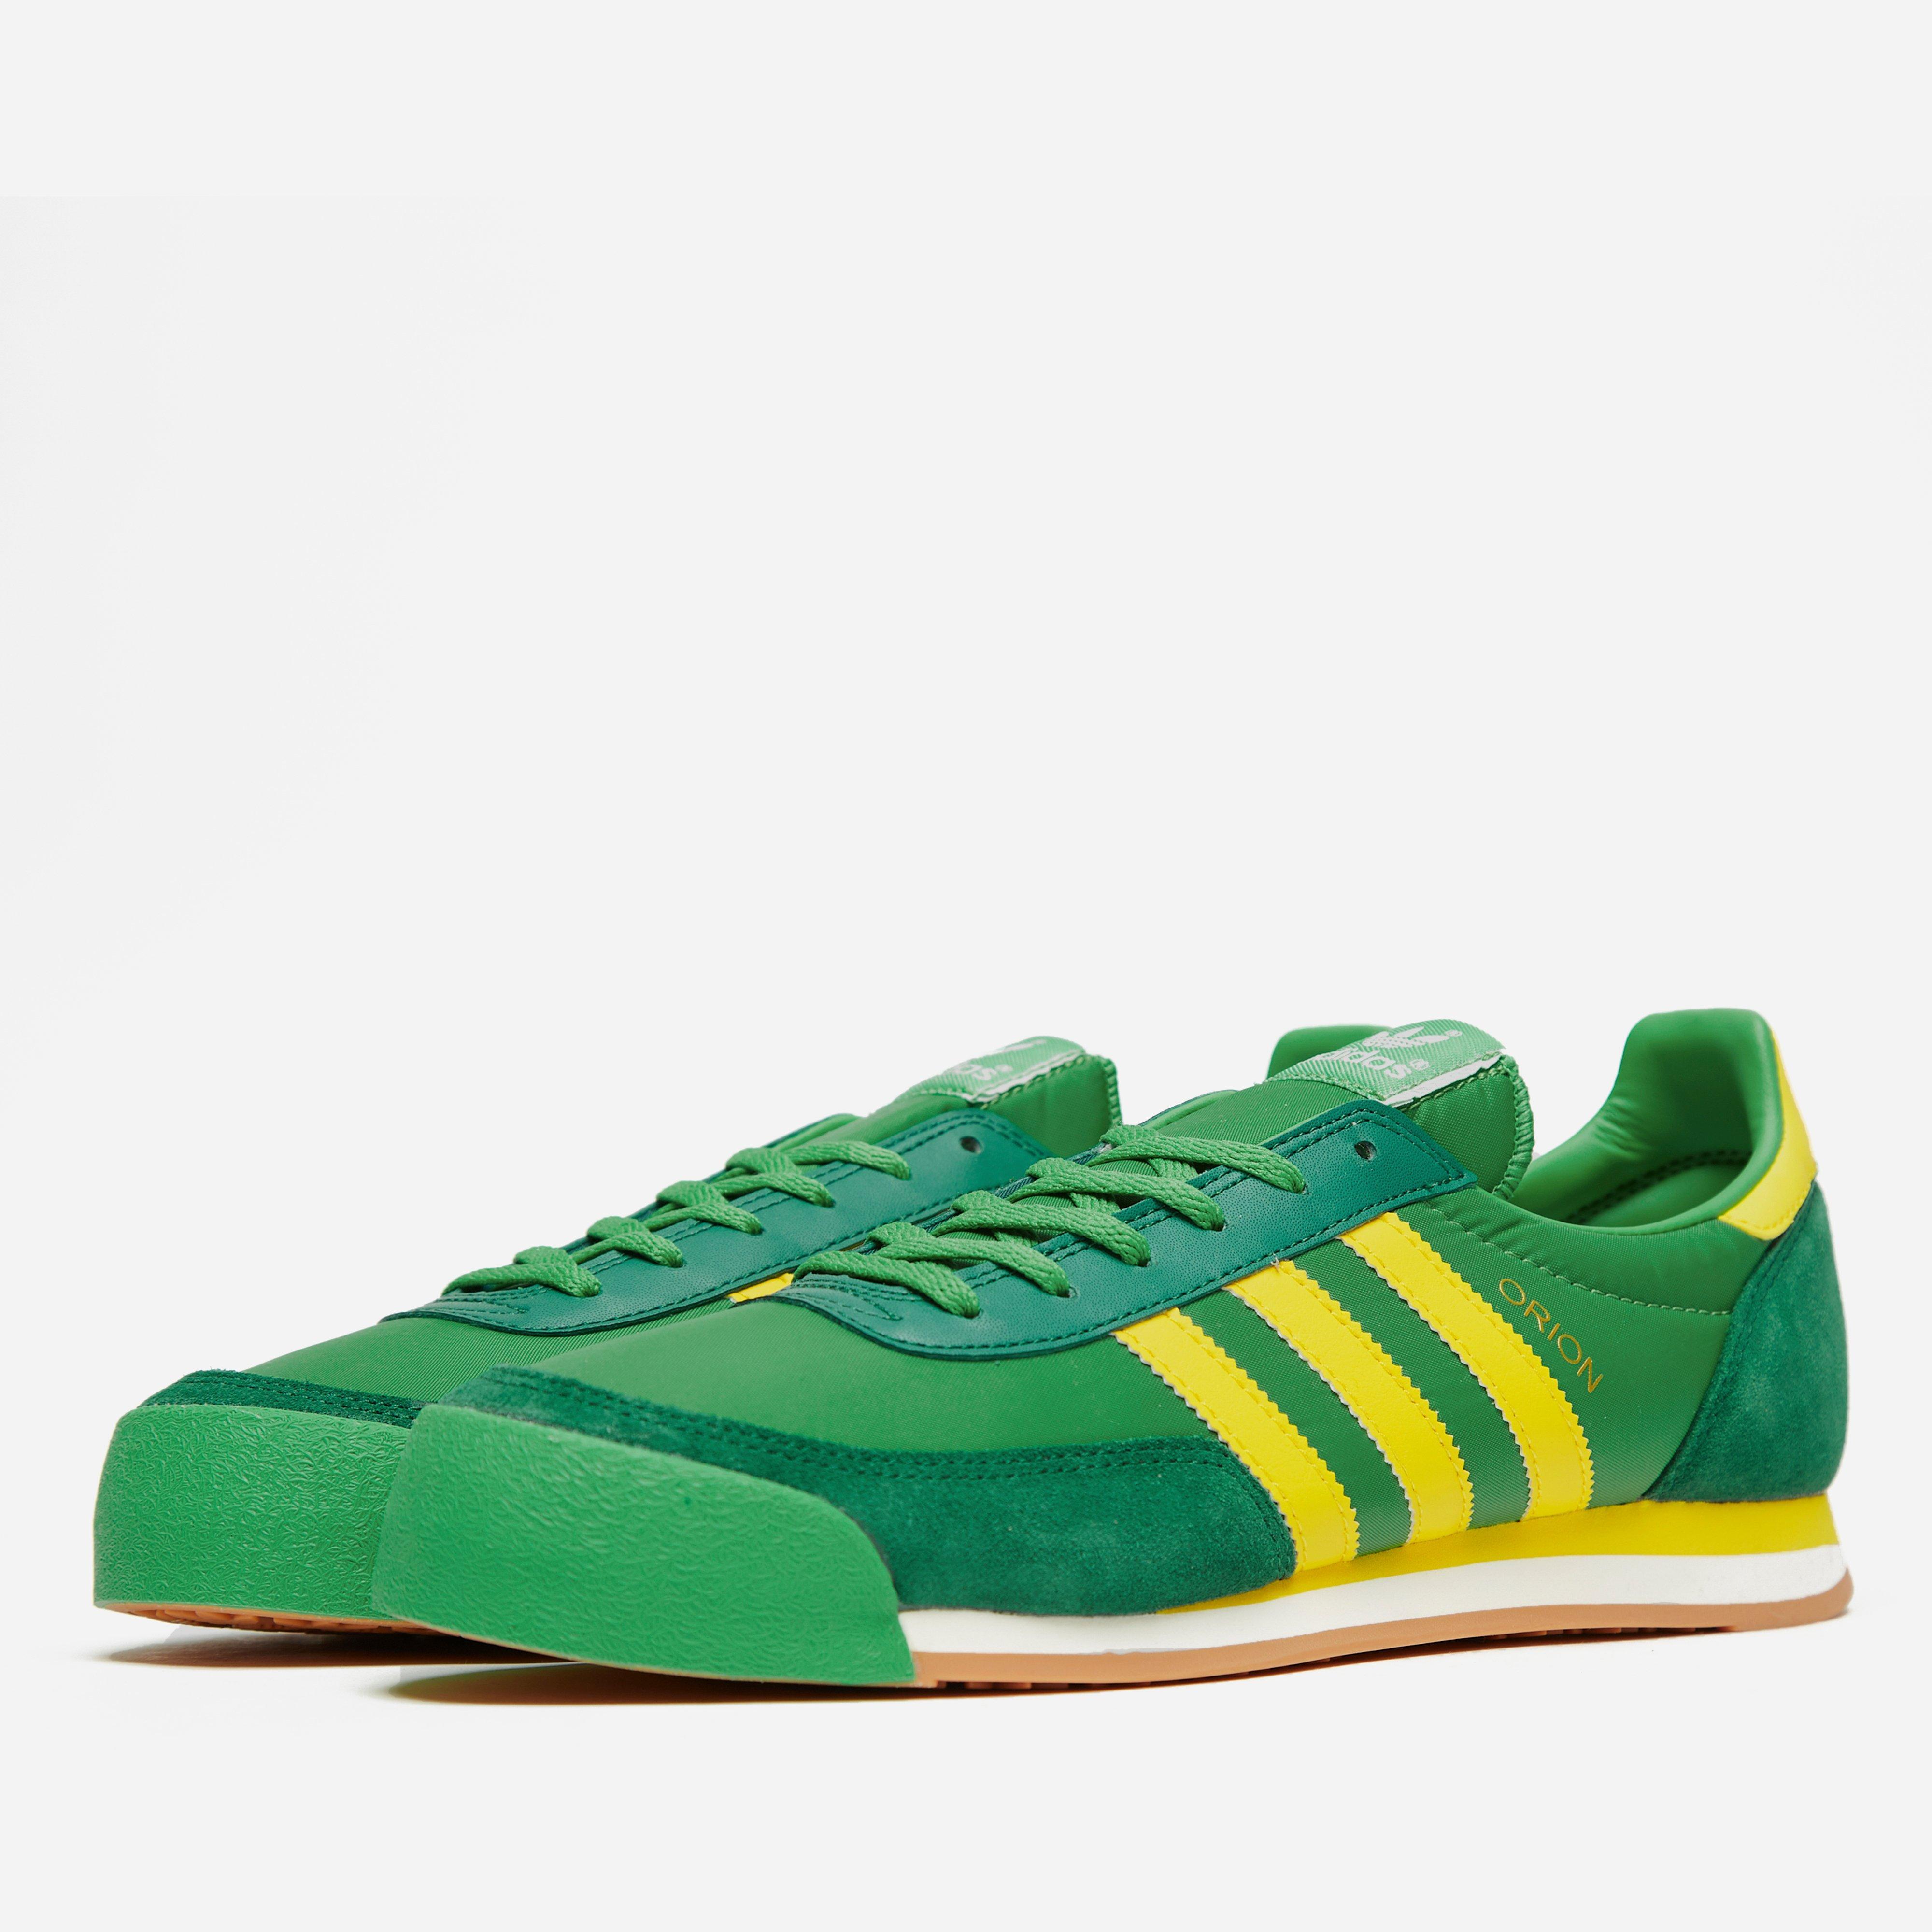 barbermaskine anmodning Oxide adidas Originals Synthetic Orion in Green/Yellow (Green) for Men - Lyst